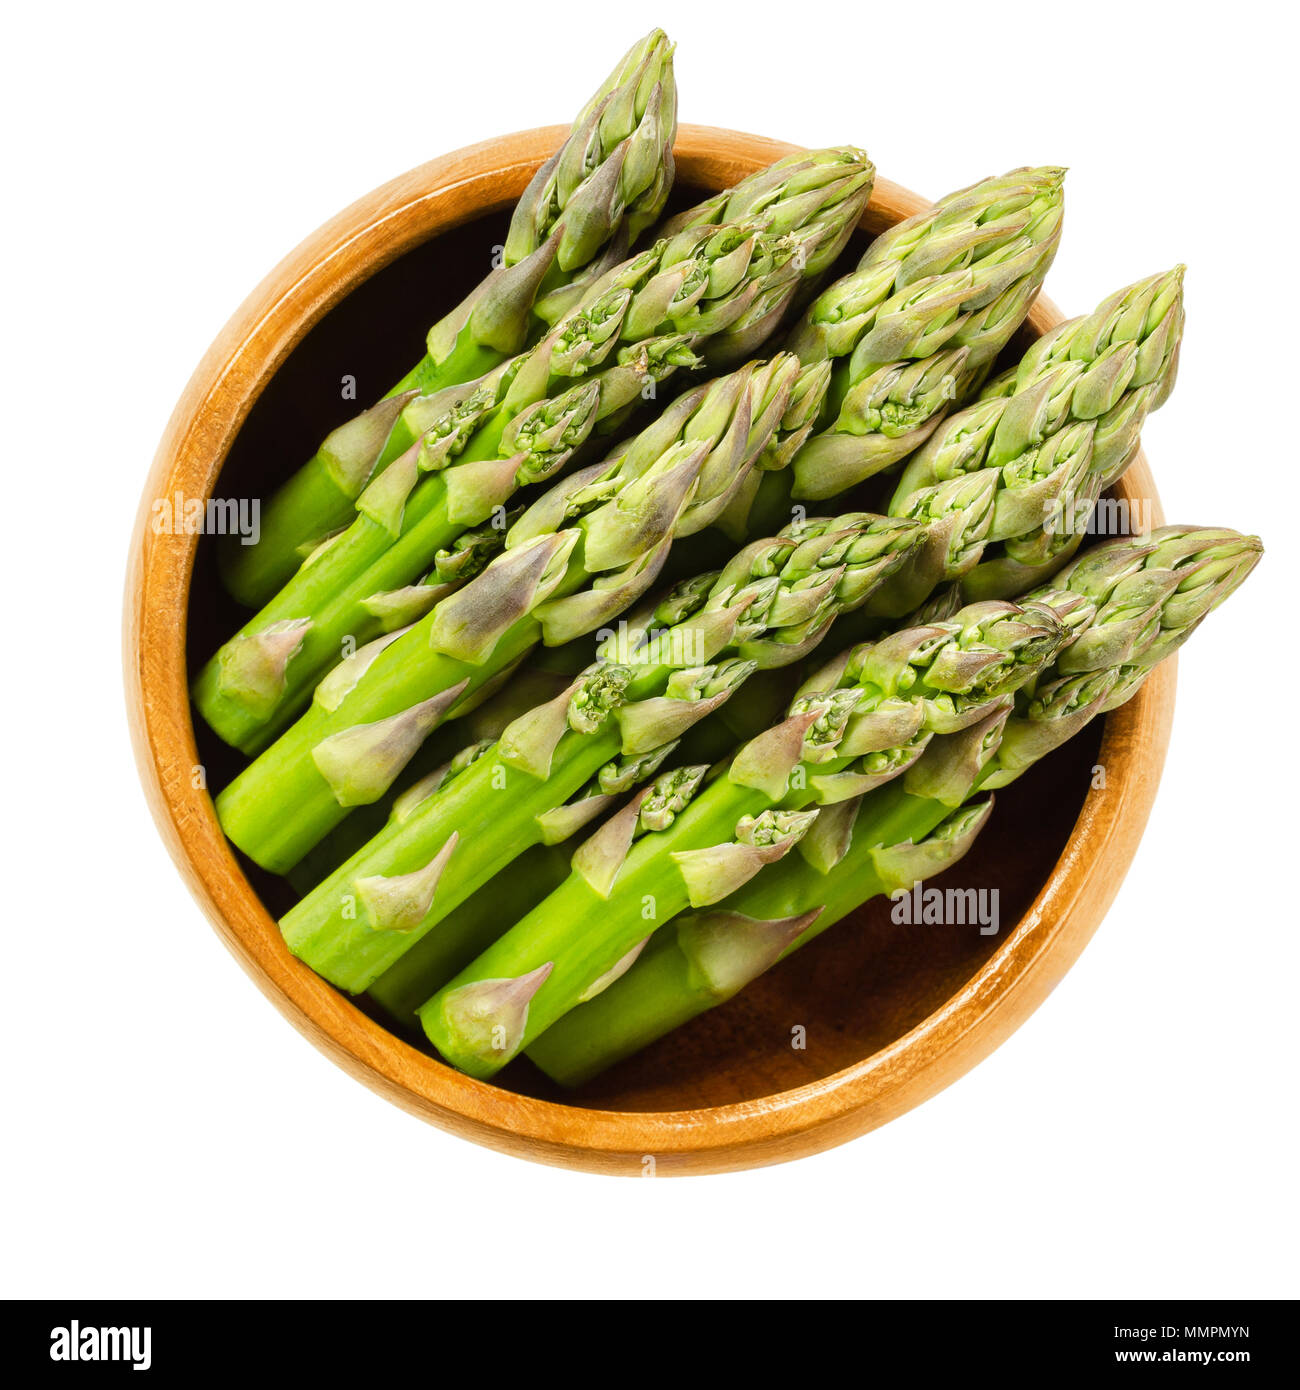 Fresh green asparagus tips in wooden bowl. Sparrow grass shoots. Cultivated Asparagus officinalis. Vegetable with thick stems and closed buds. Stock Photo